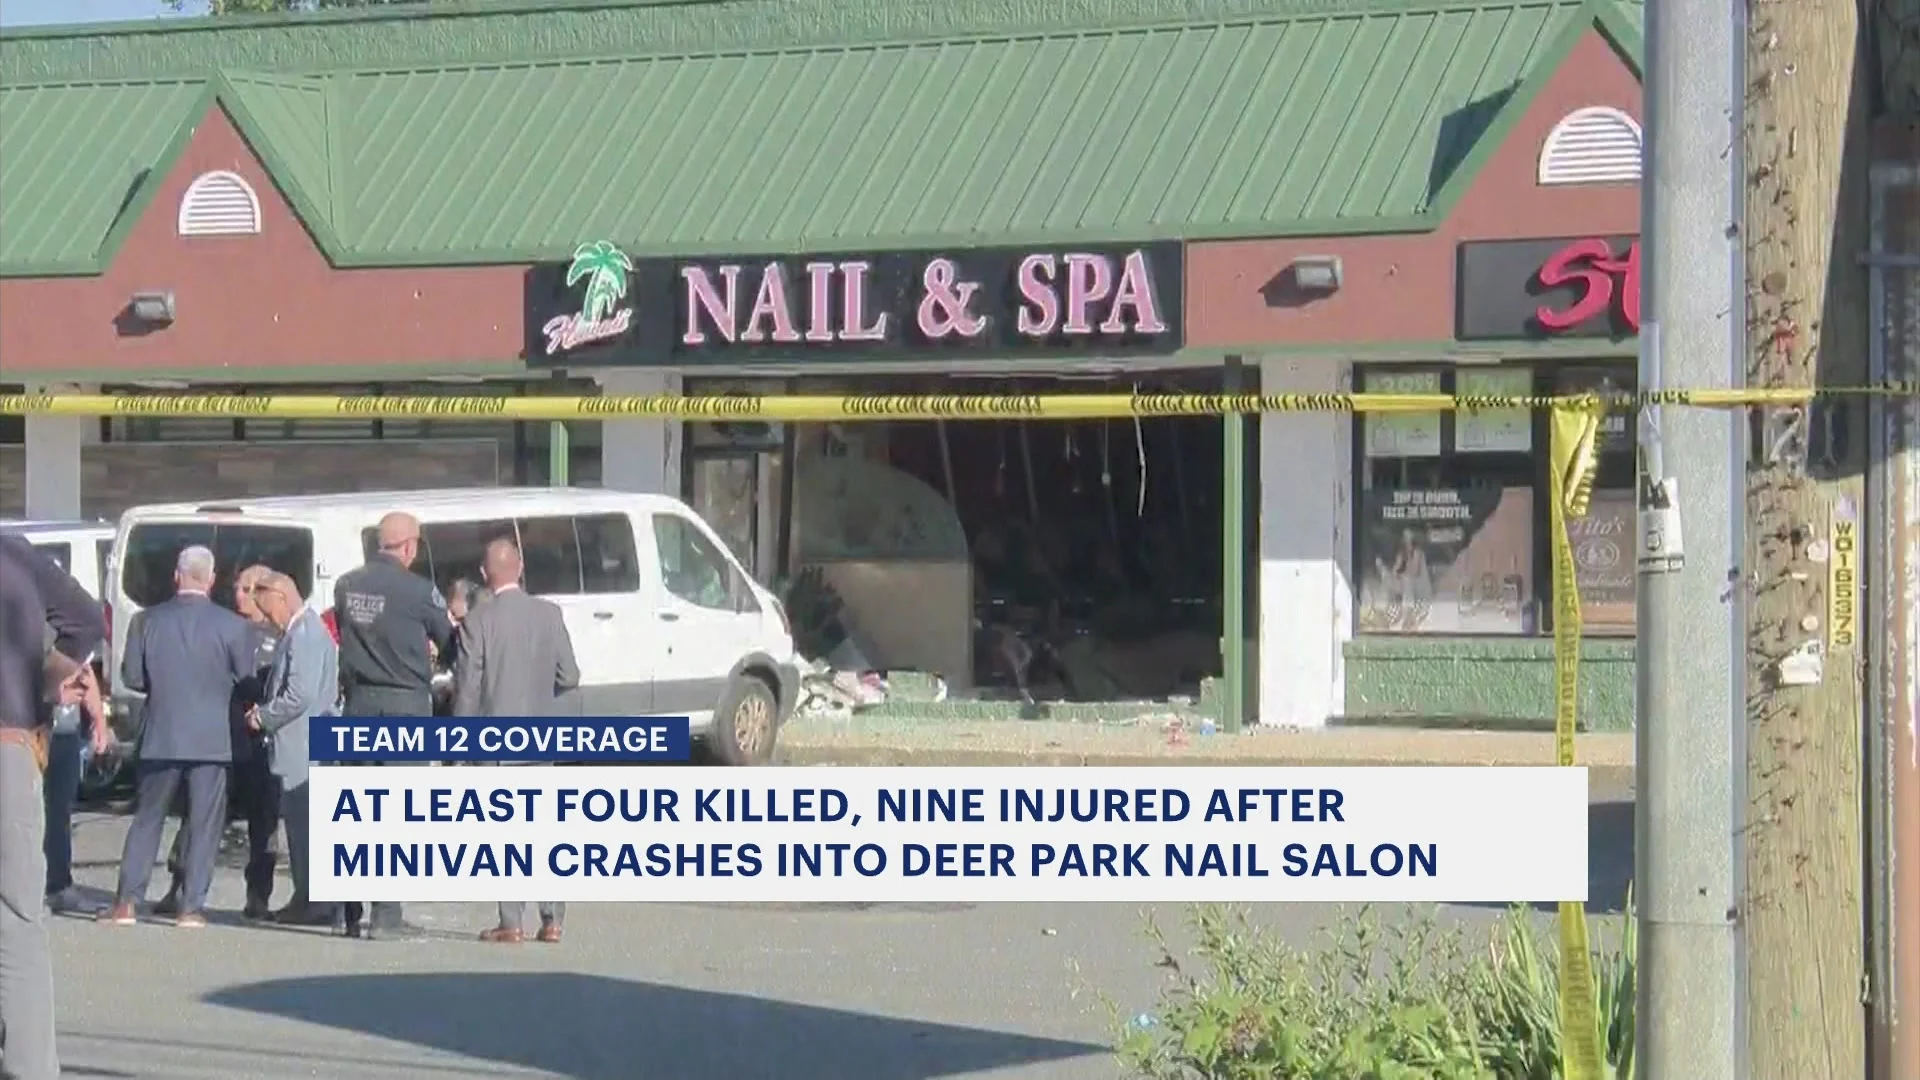 Fire officials: 4 dead, at least 9 injured after minivan crashes into Deer Park nail salon